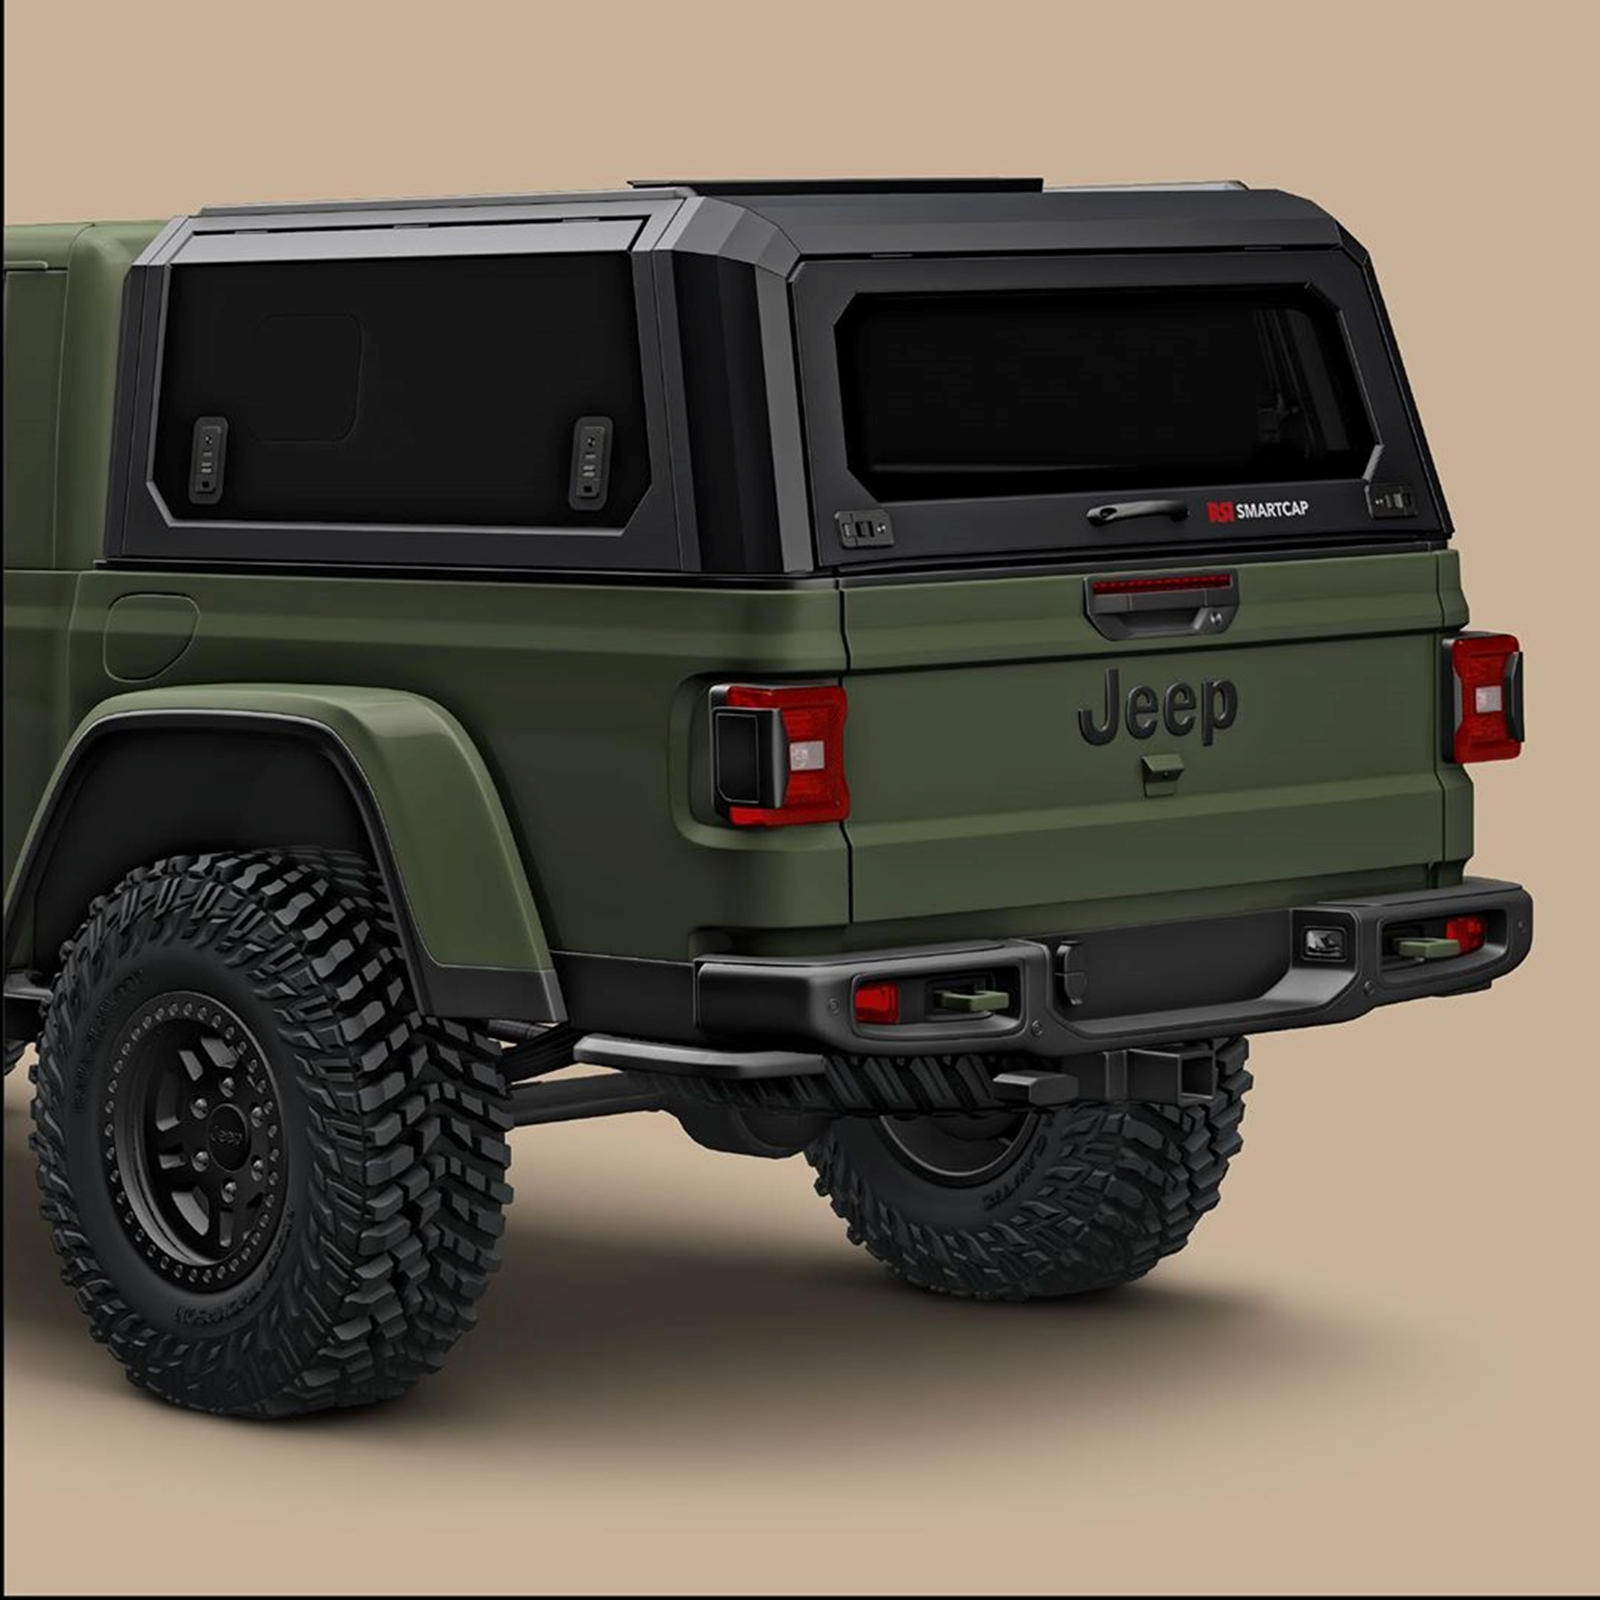 Get Ready For Adventure With This Jeep Gladiator Accessory CarBuzz